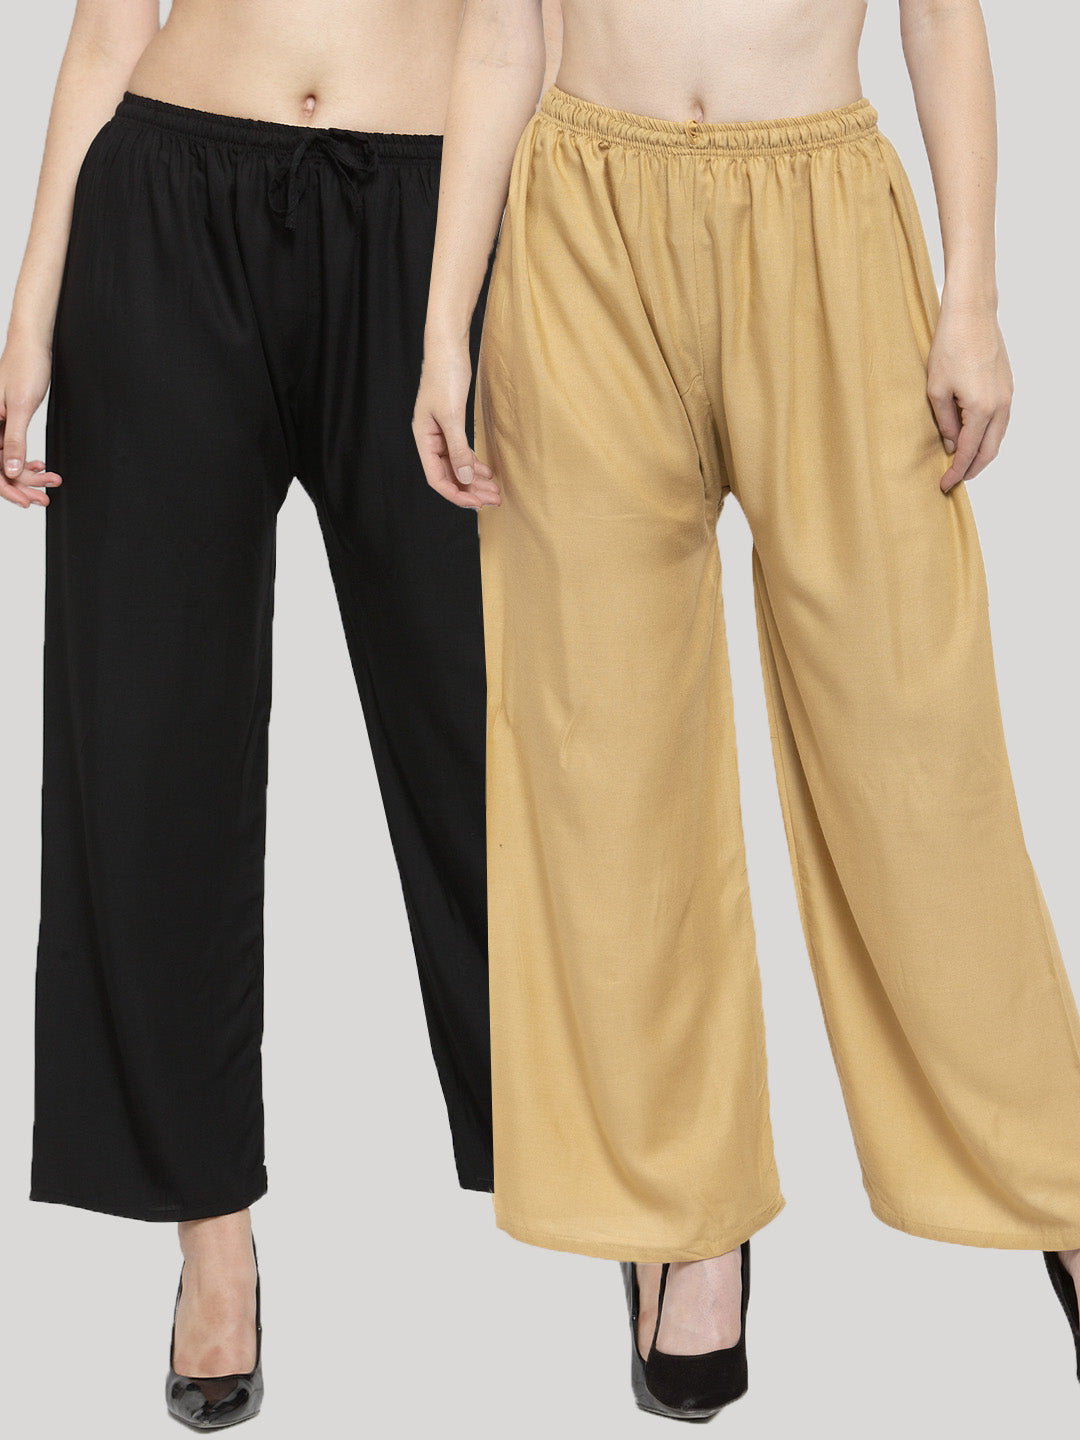 Women's Solid Black & Fawn Rayon Palazzo (Pack Of 2) - Wahe-NOOR